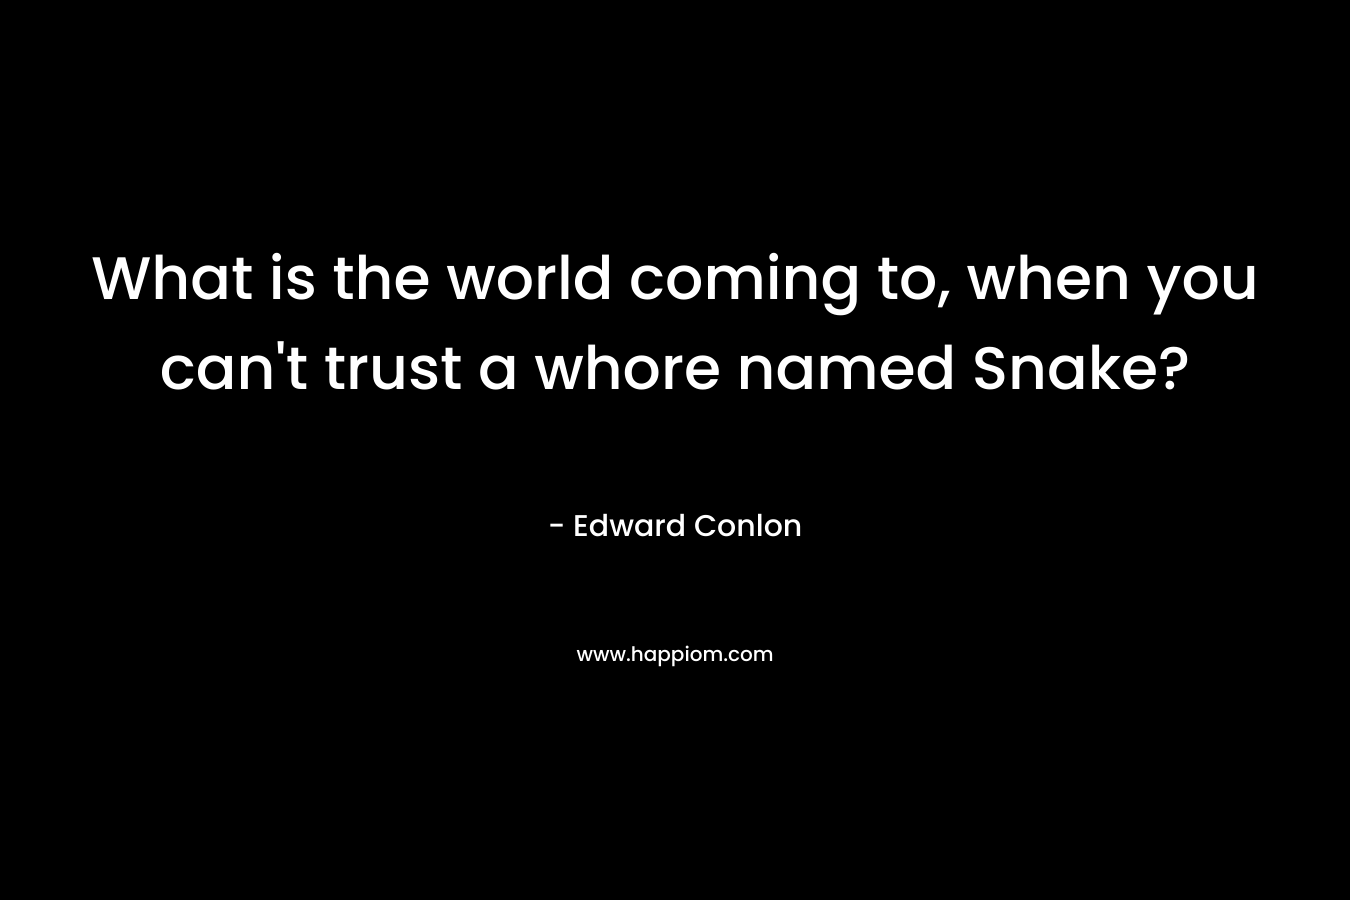 What is the world coming to, when you can’t trust a whore named Snake? – Edward Conlon